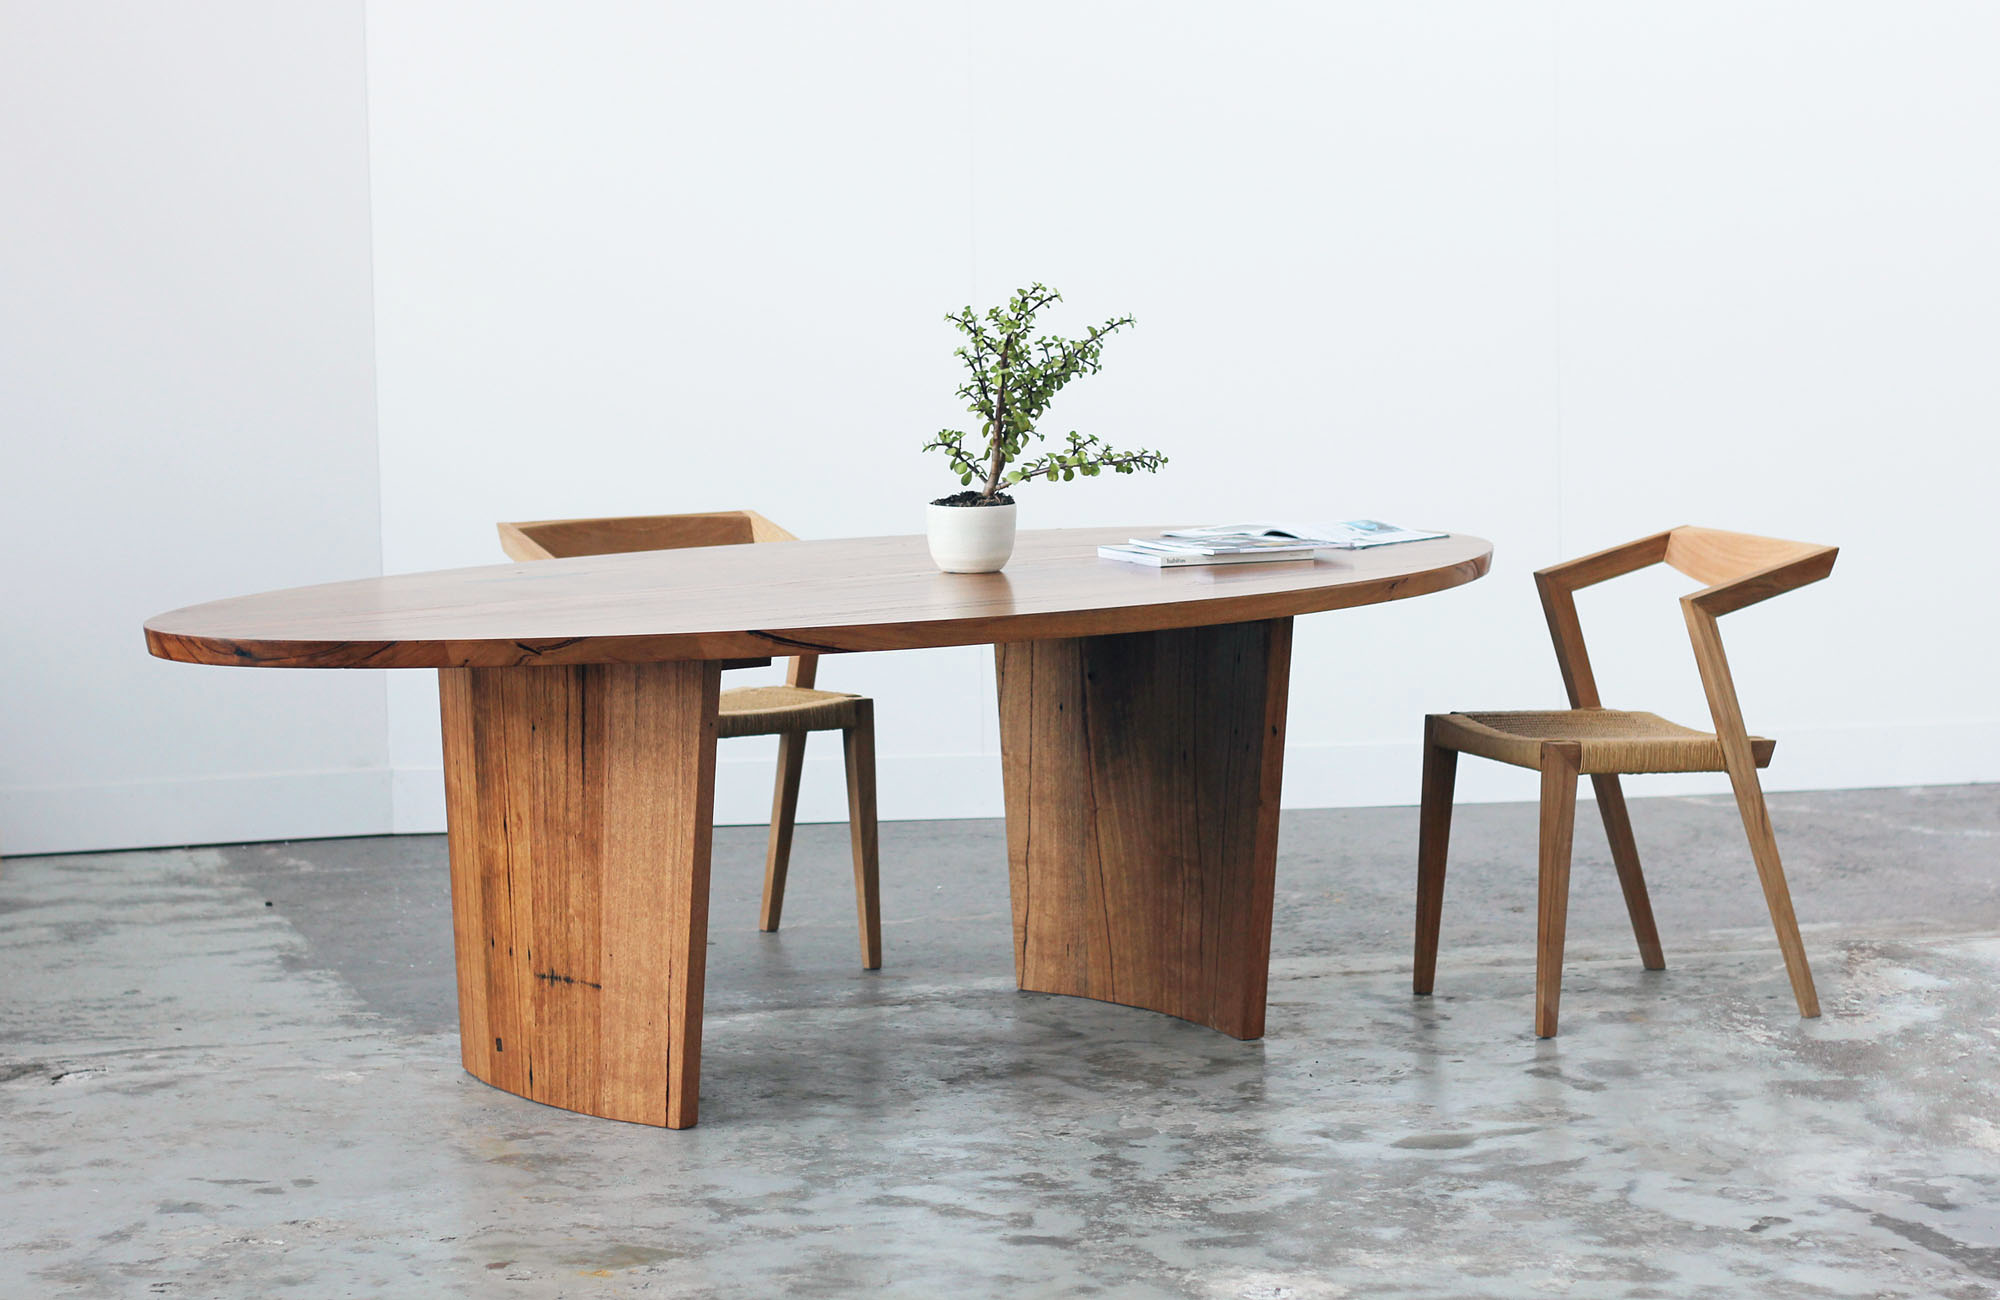 Peter McManus on making timber furniture from Victoria's most iconic ...